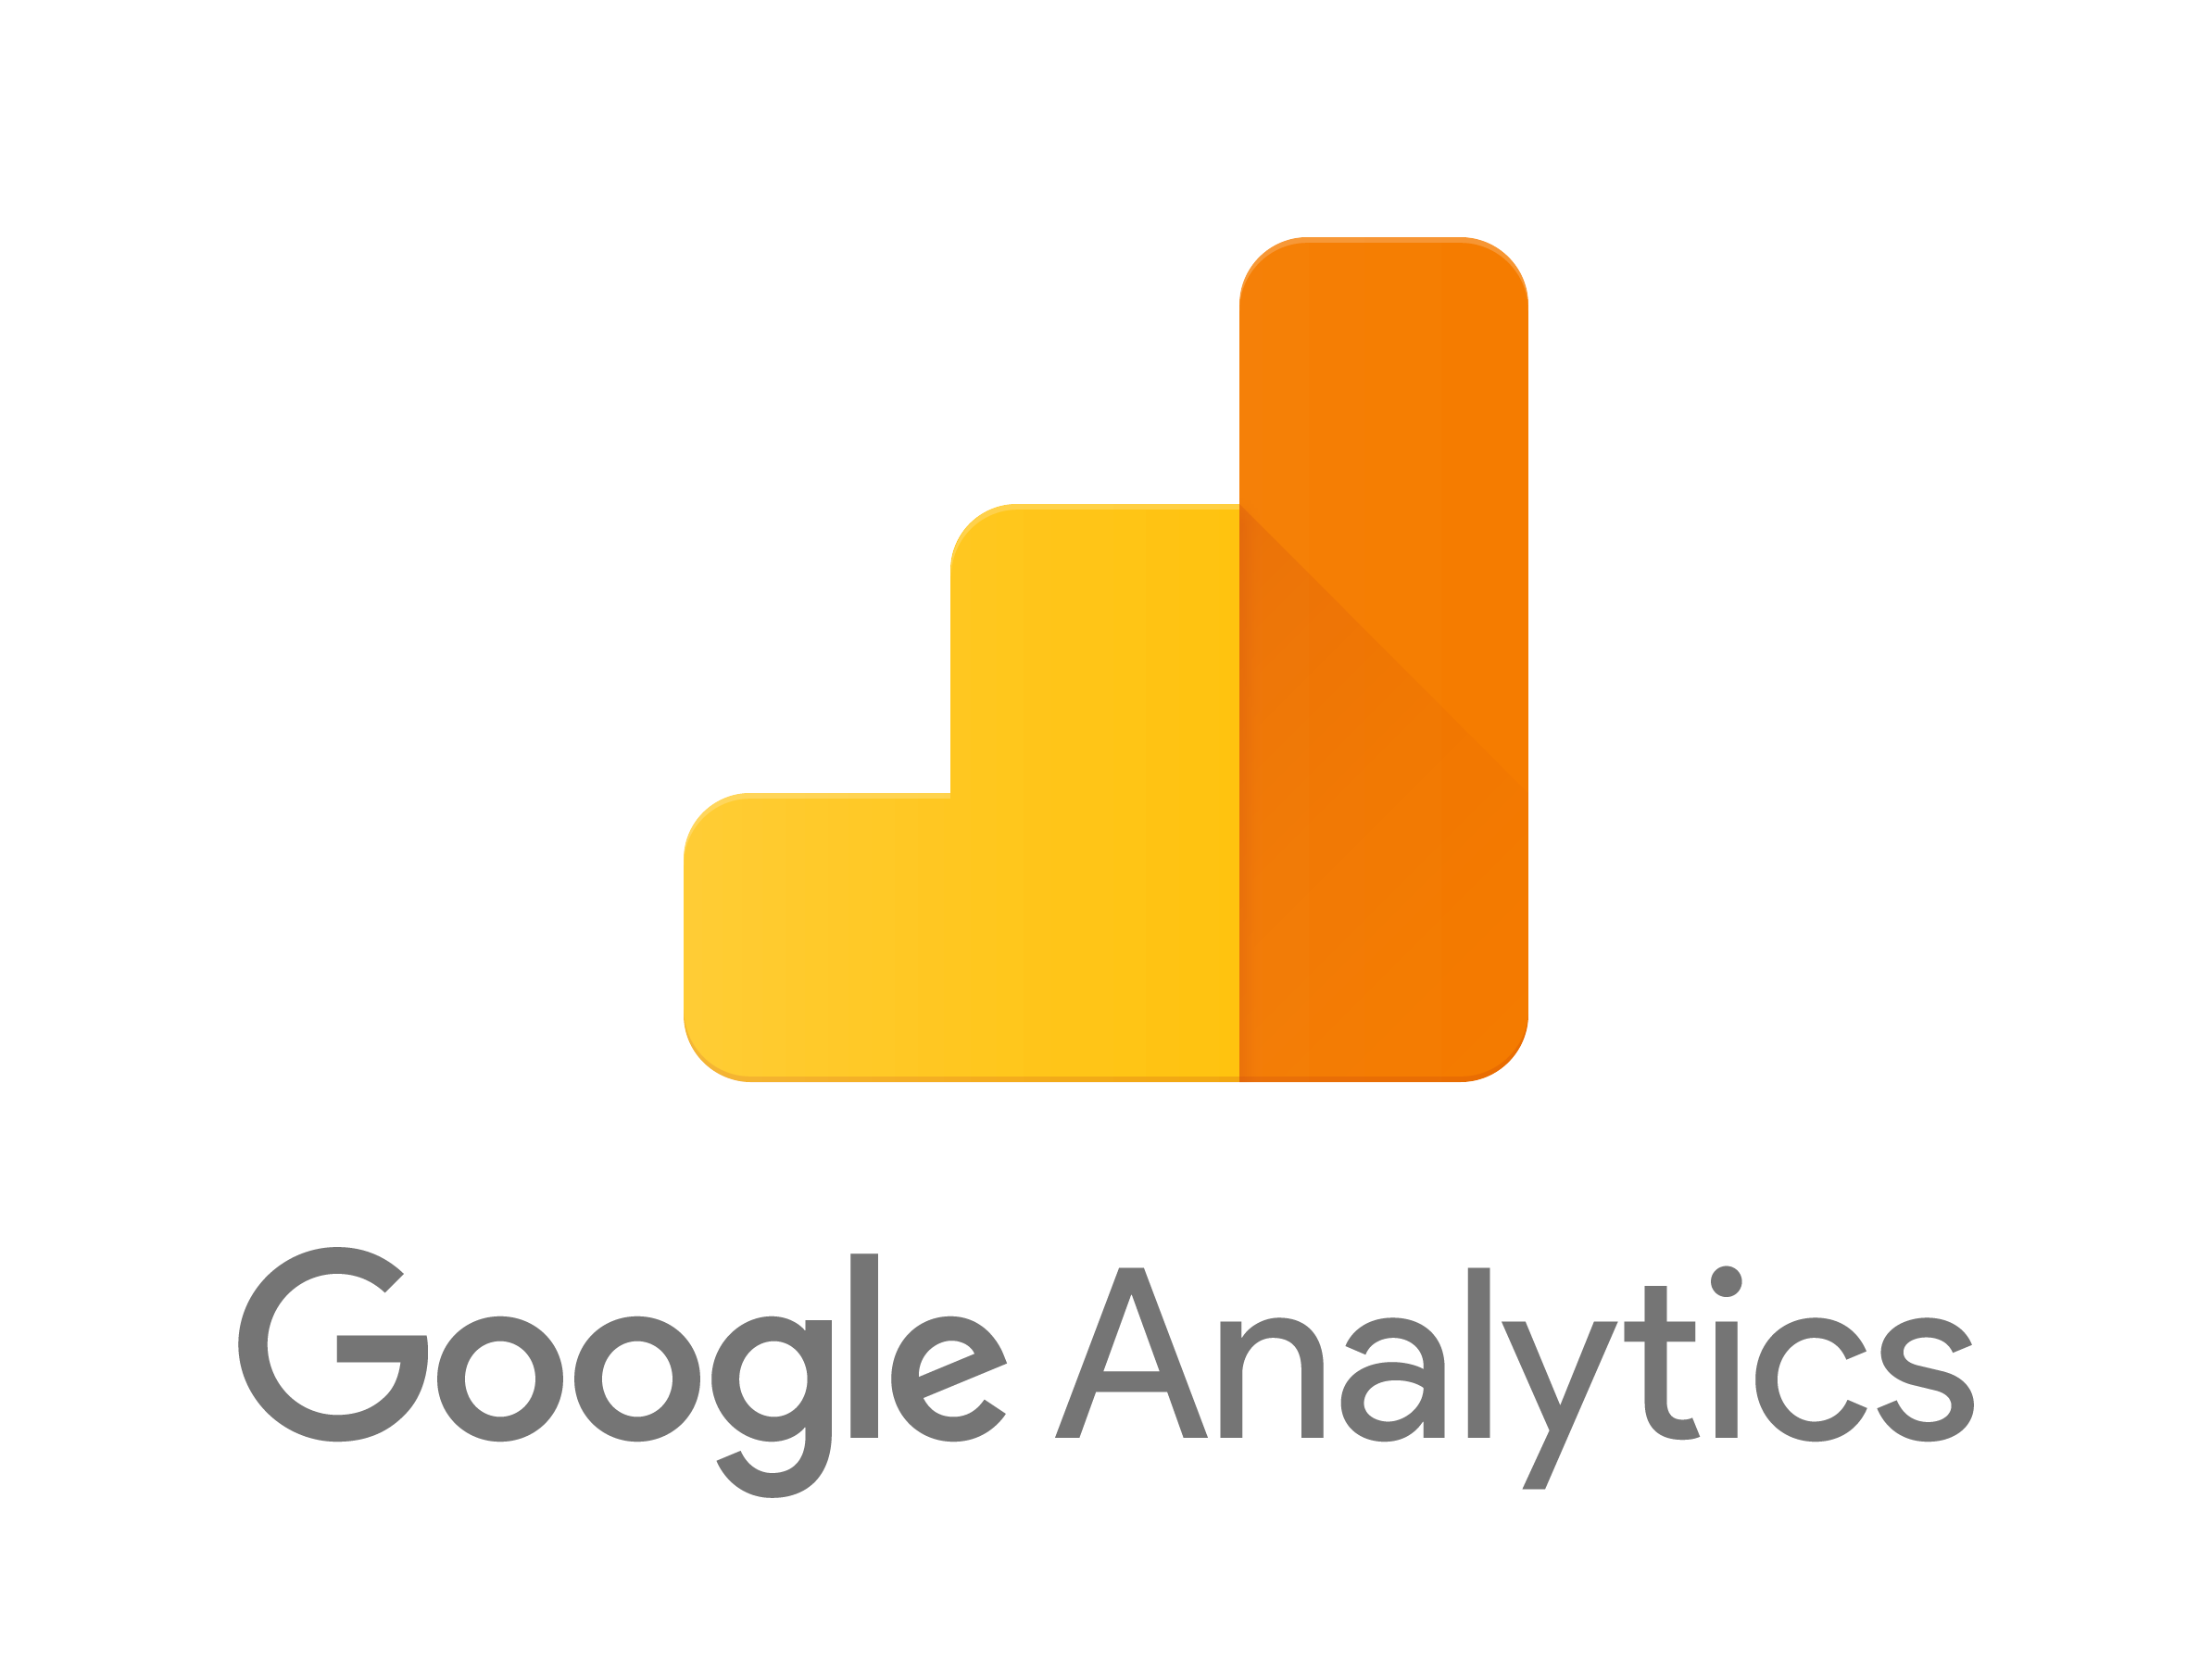 https://developers.google.com/analytics/images/terms/logo_lockup_analytics_icon_vertical_black_2x.png